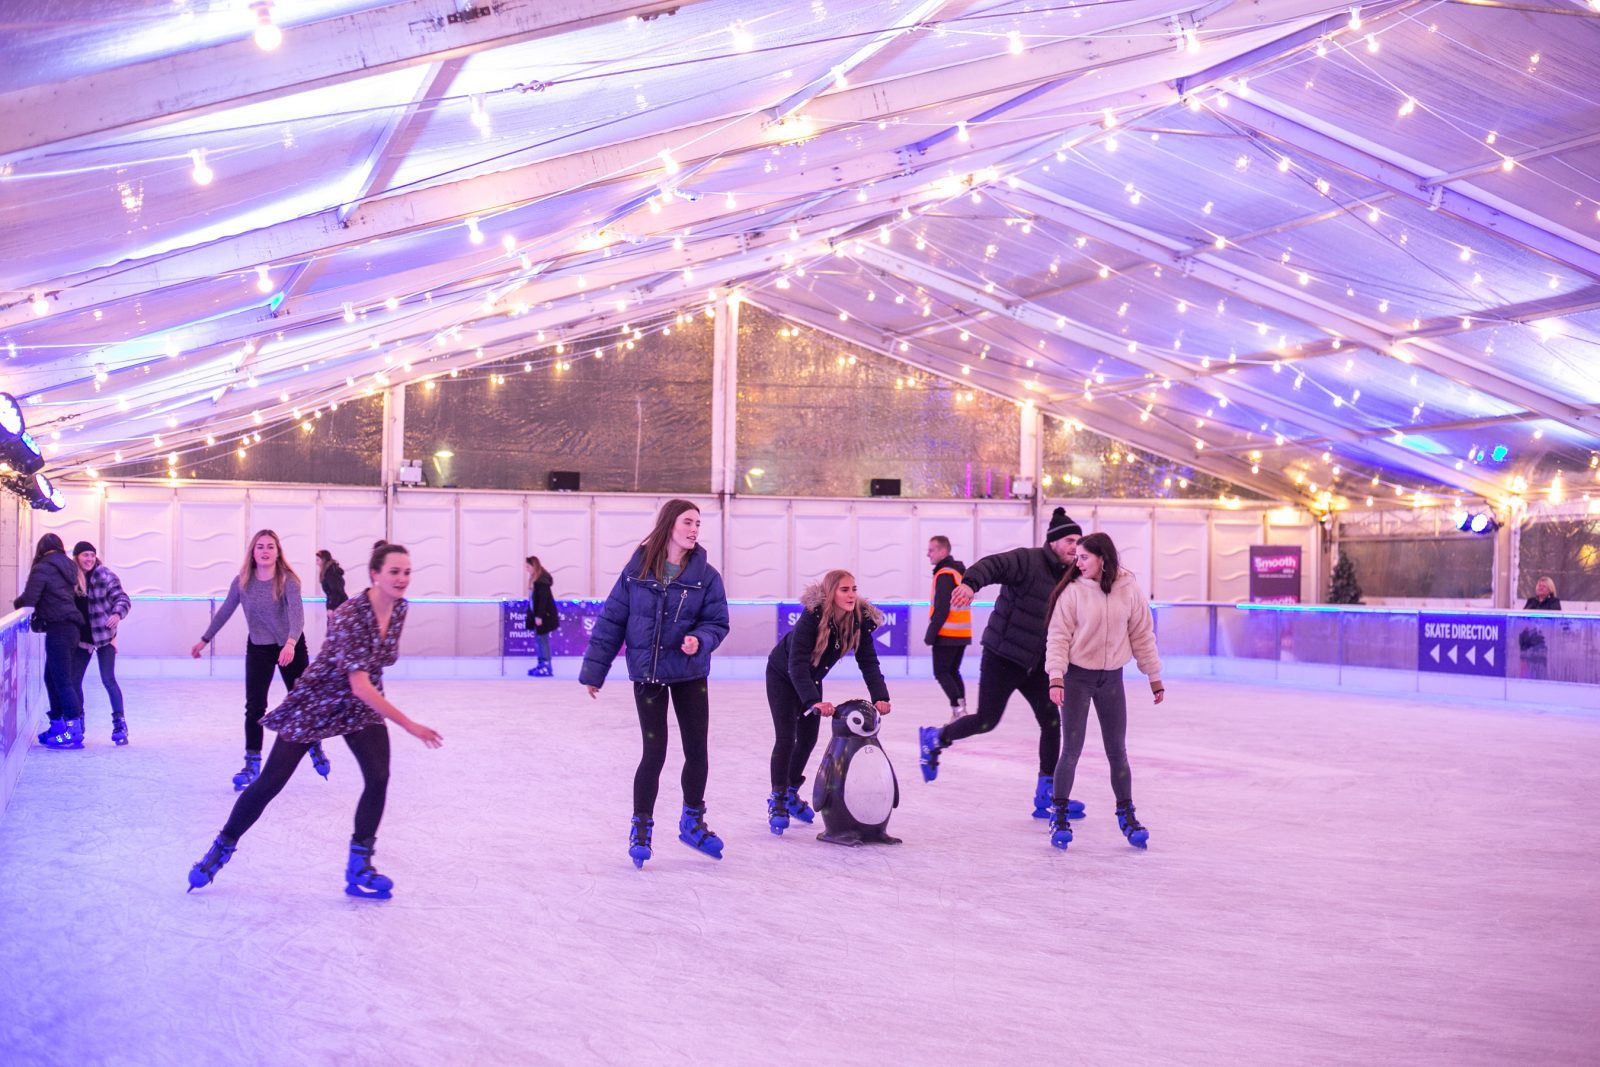 6 festive ice rinks to visit in Manchester this winter, The Manc